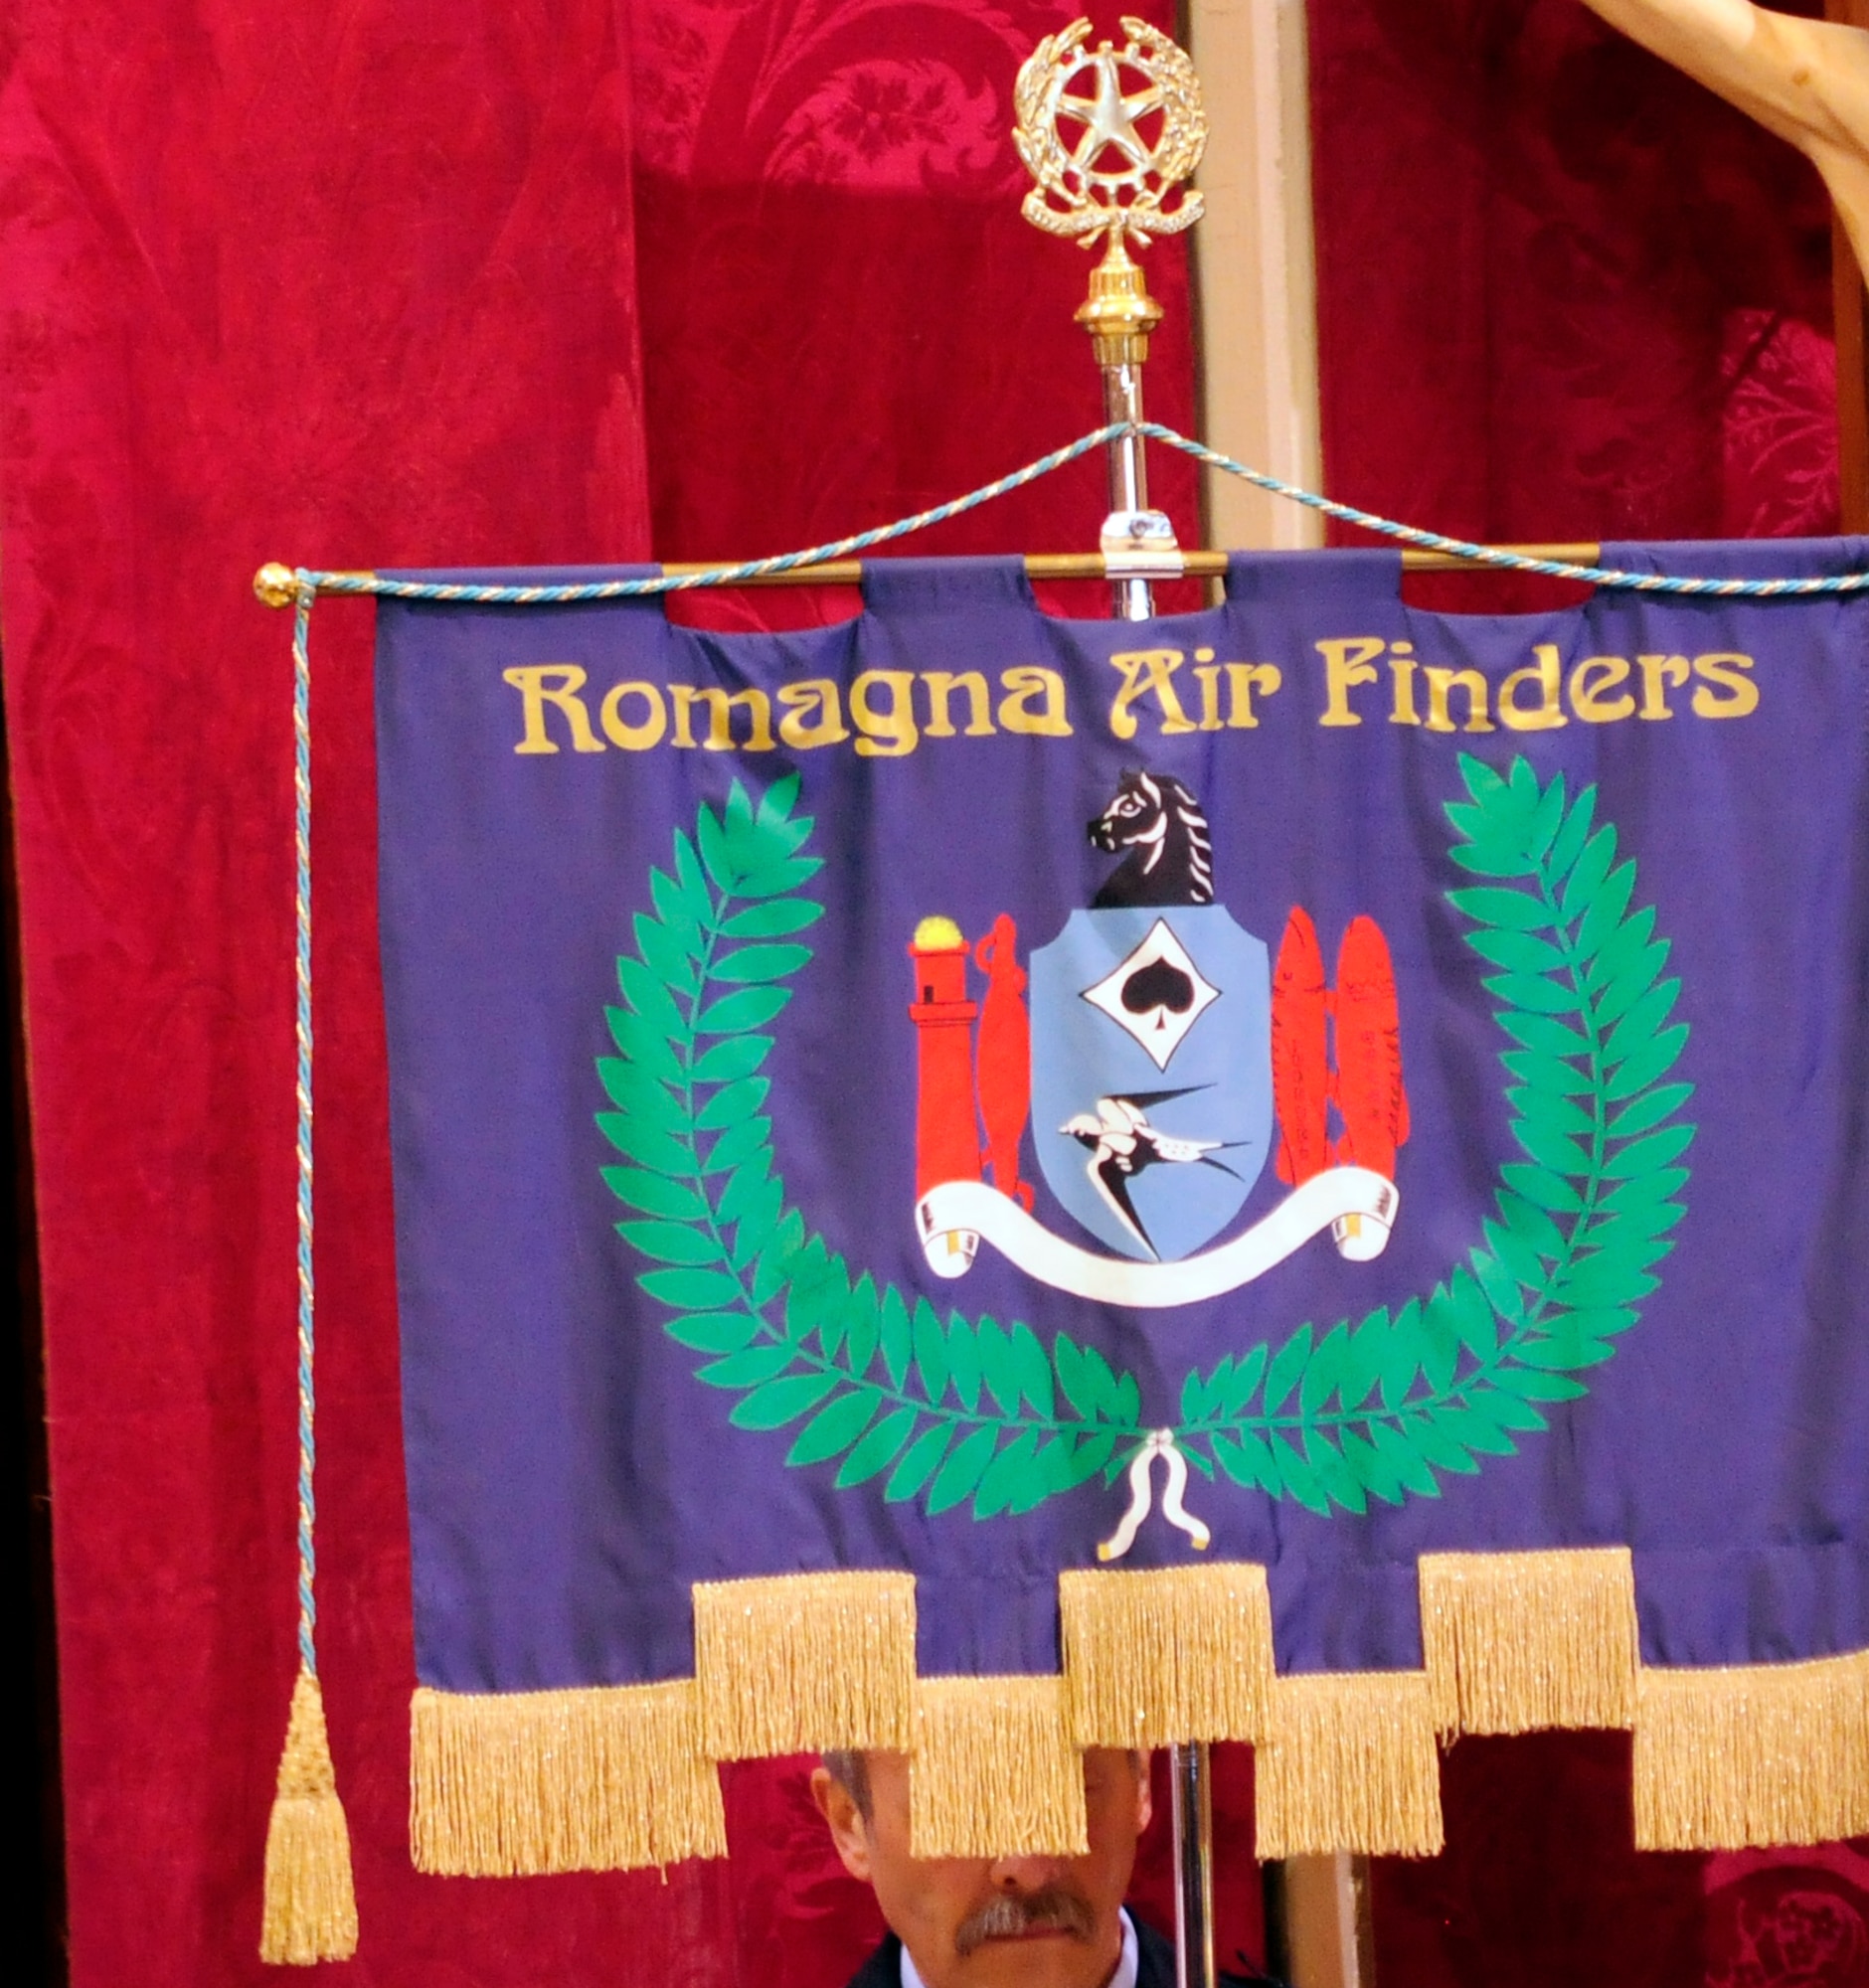 The Romagna Air Finders banner is presented during a remembrance ceremony for Maj. Hugh Muse, Jr. on April 14 at Vighizzolo D’Este, Italy. The Romagna Air Finders discovered Muse’s remains in 2008, nearly 65 years after he was shot down during a bombing mission over Northern Italy. (U.S. Air Force photo/Airman 1st Class Briana Jones)